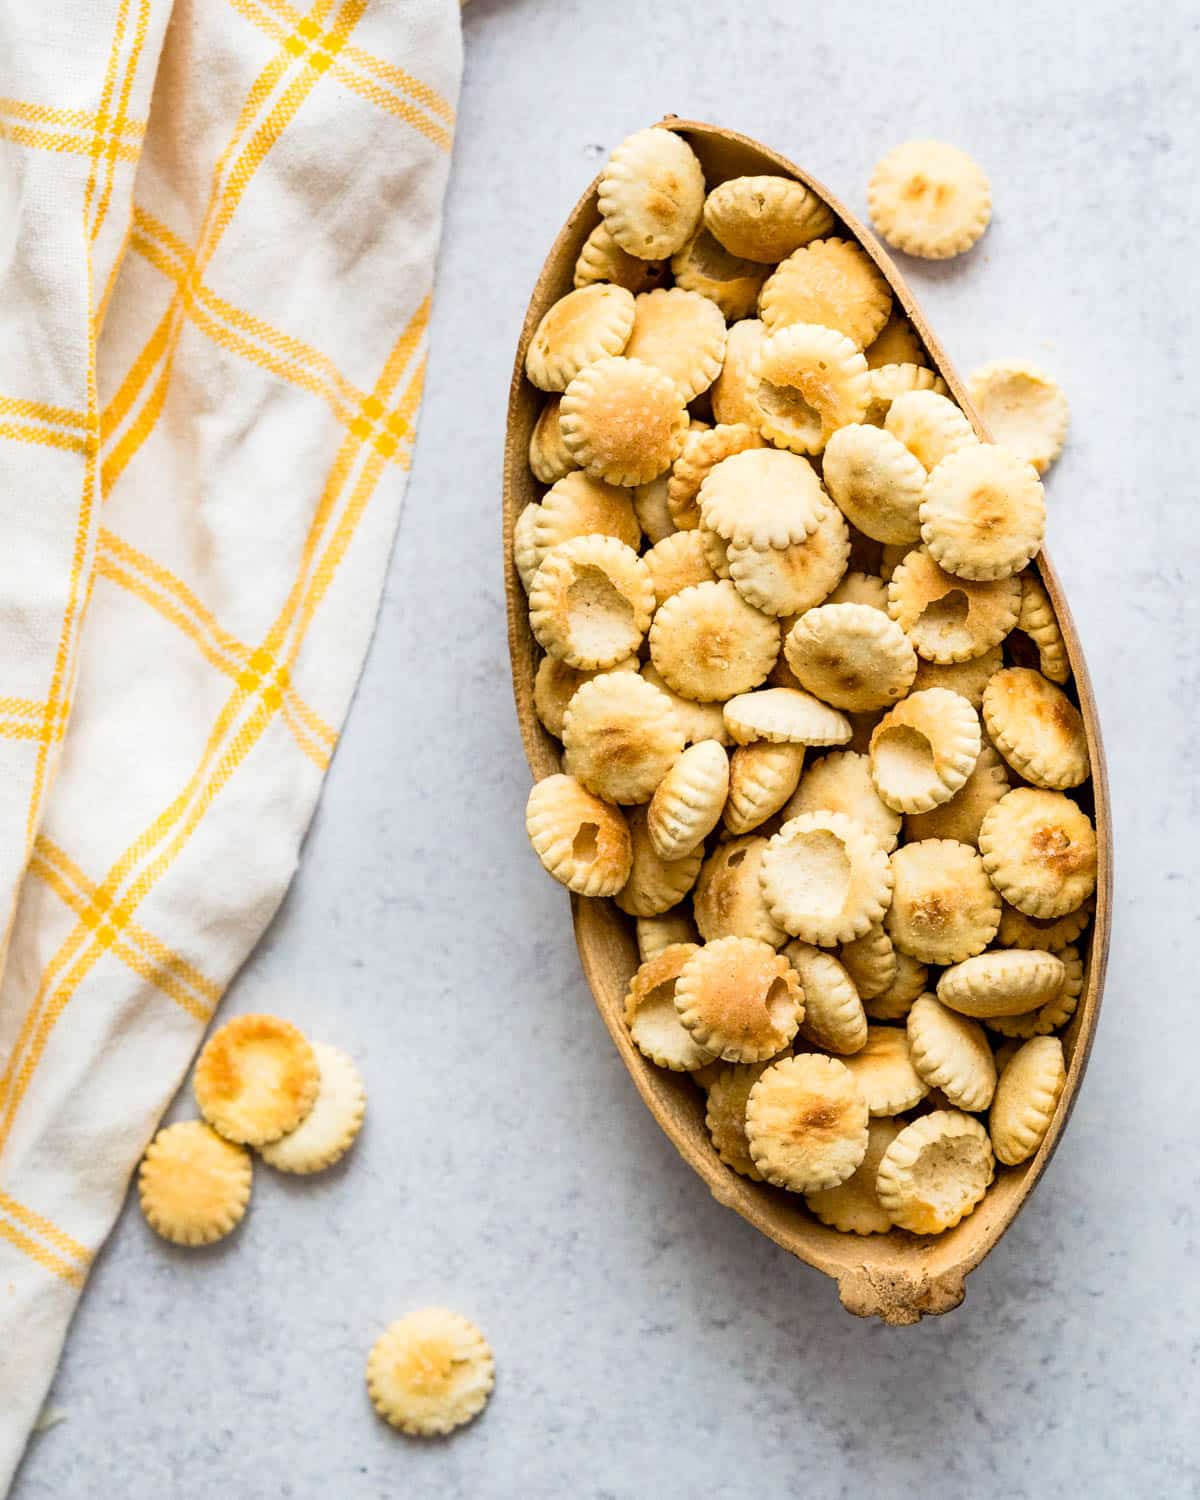 Plain oyster crackers.